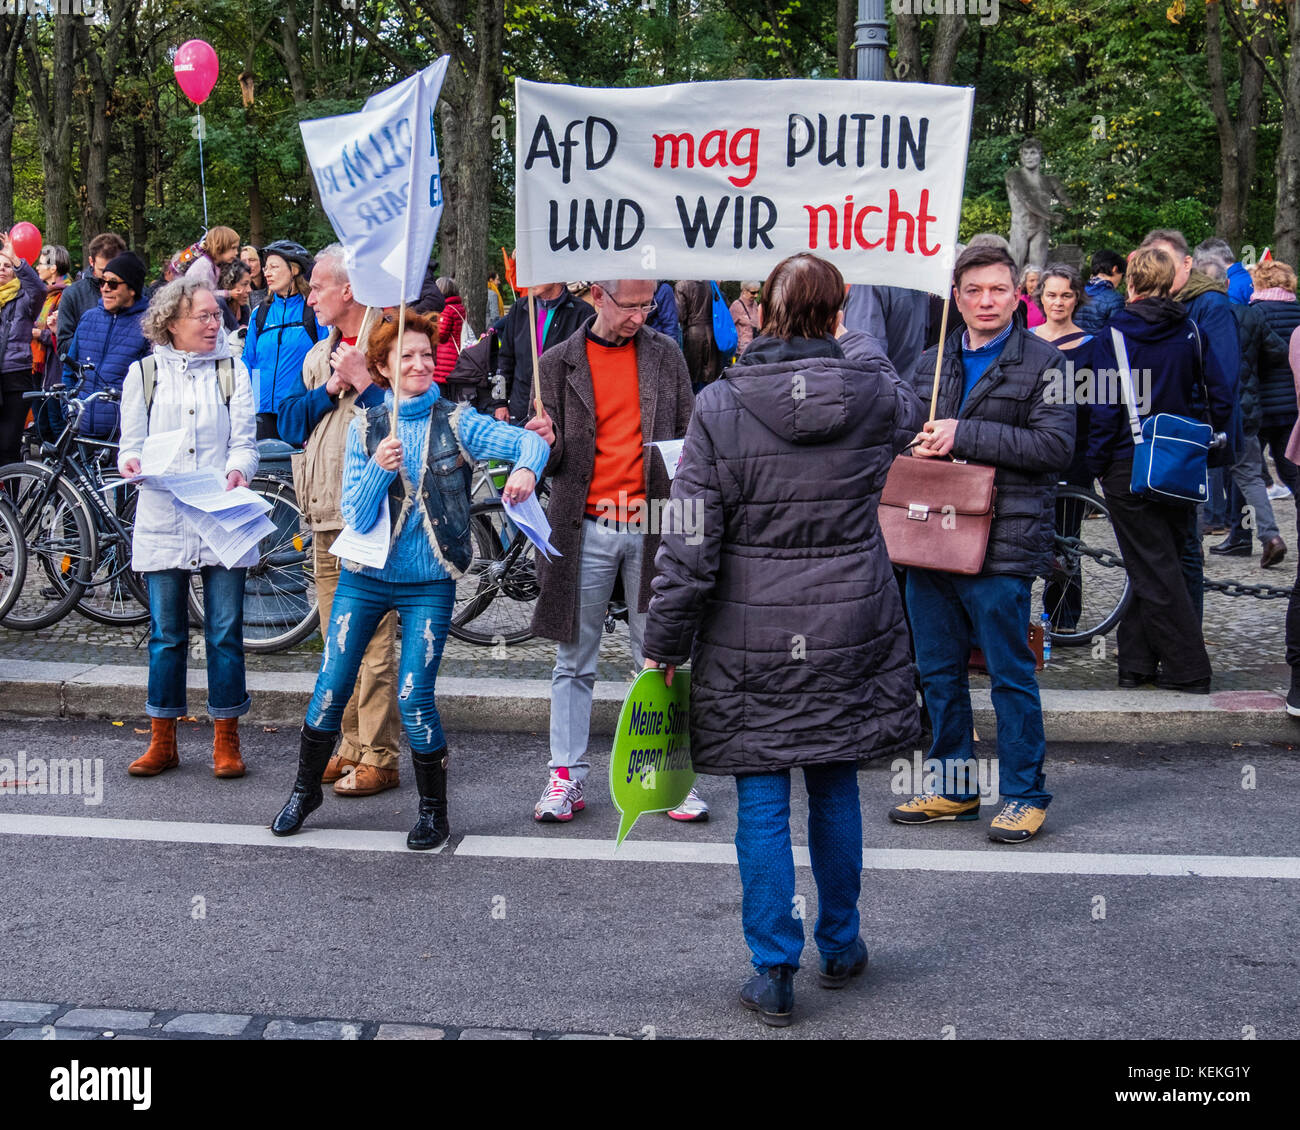 Berlin, Mitte. 22nd October 2017. Berliners protest against hate and racism In Parliament. Several thousand people collected at the Brandenburg Gate today to protest against racism in Parliament. The newly elected German parliament holds its first session on Tuesday 24th October and protestors marched past the Reichstag building to protest against the nationalist, anti-immigration AfD party who will appear in parliament for the first time having taken 12.6 percent of the vote in the recent election. Credit: Eden Breitz/Alamy Live News Stock Photo